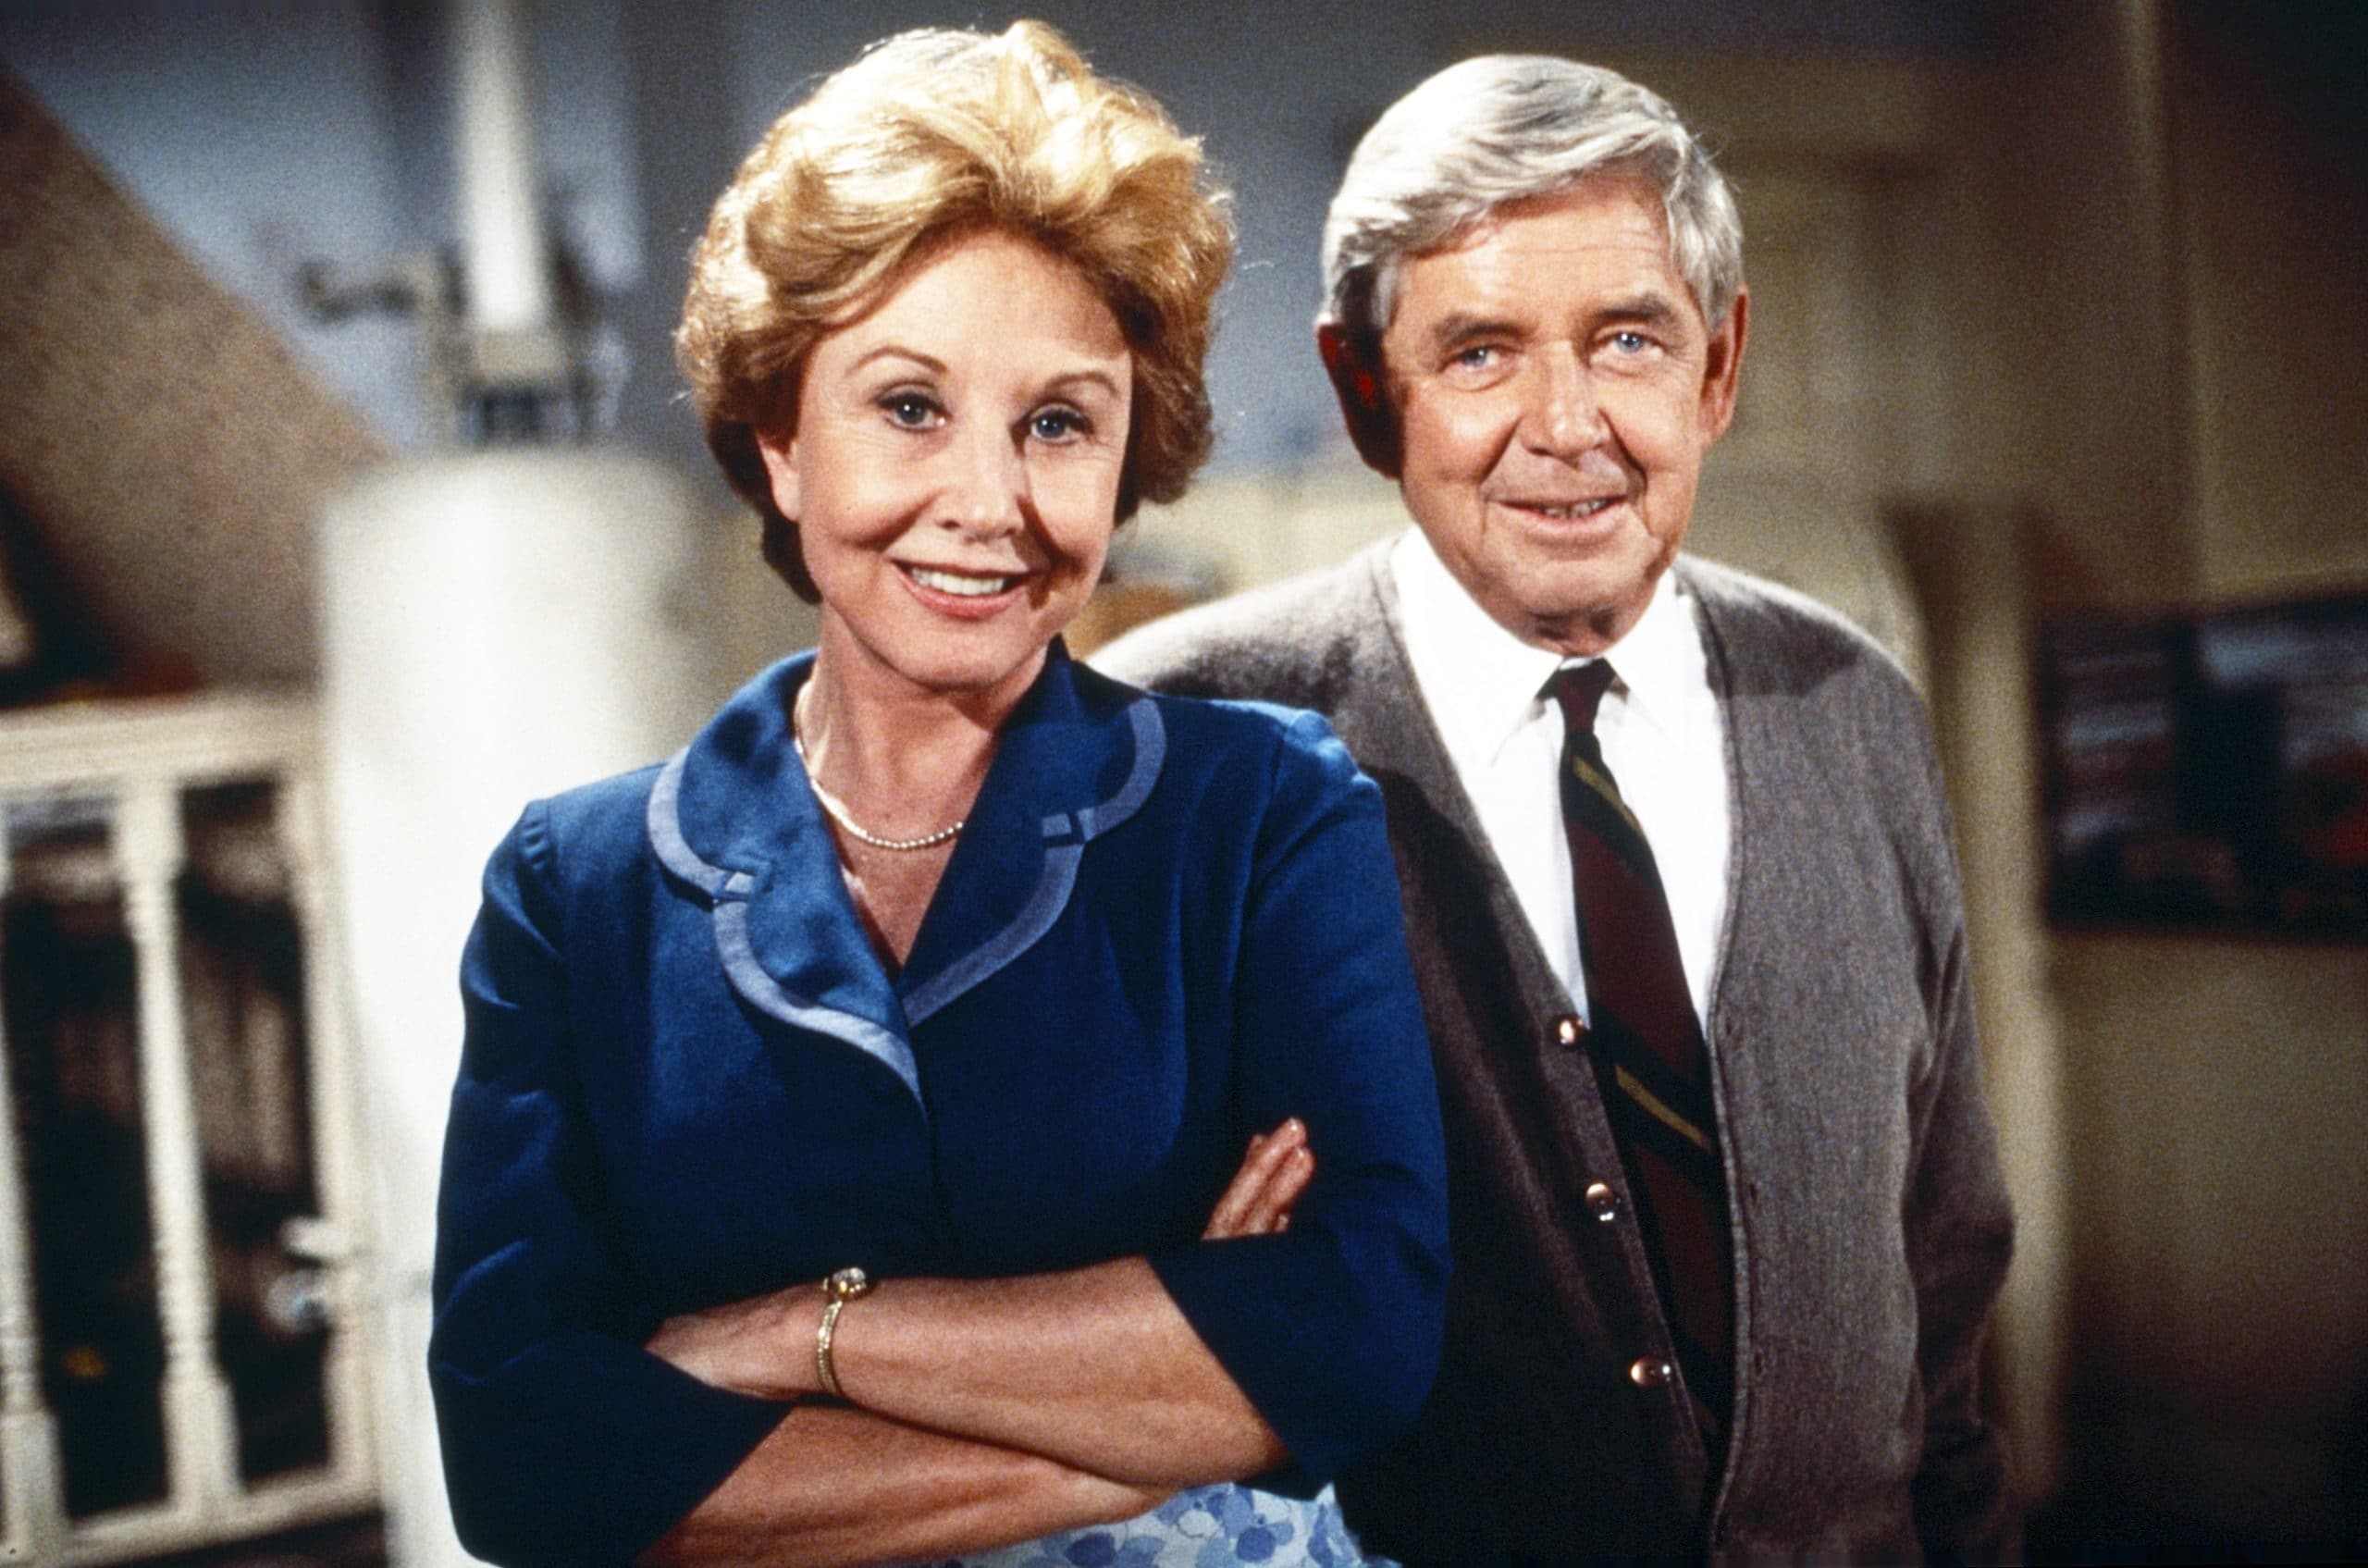 A WALTON THANKSGIVING REUNION, from left: Michael Learned, Ralph Waite, 1993